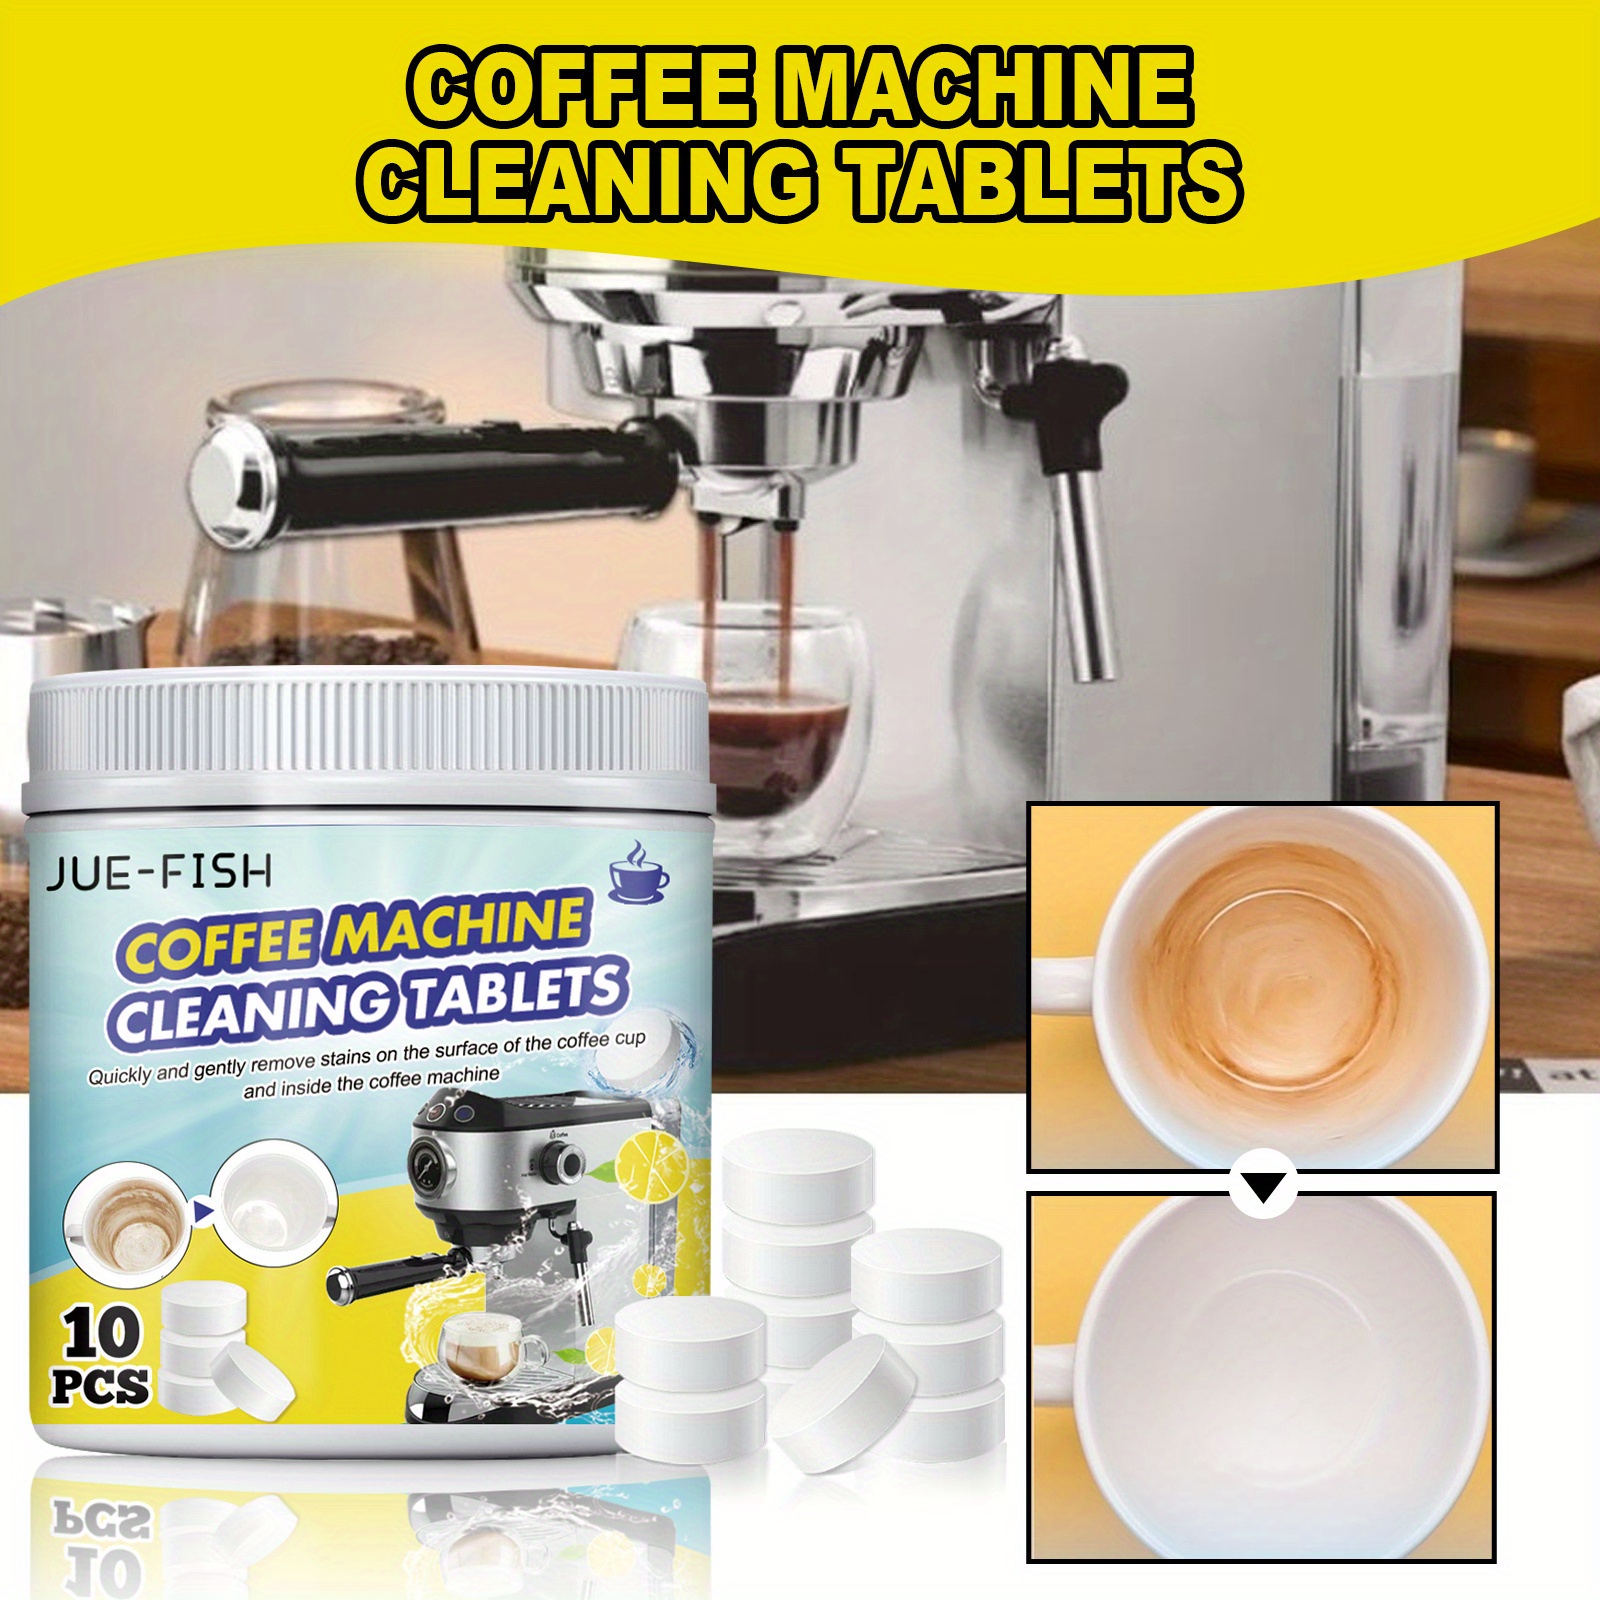 ACTIVE Coffee Maker Cleaner Tablets - Descales & Deep Cleans